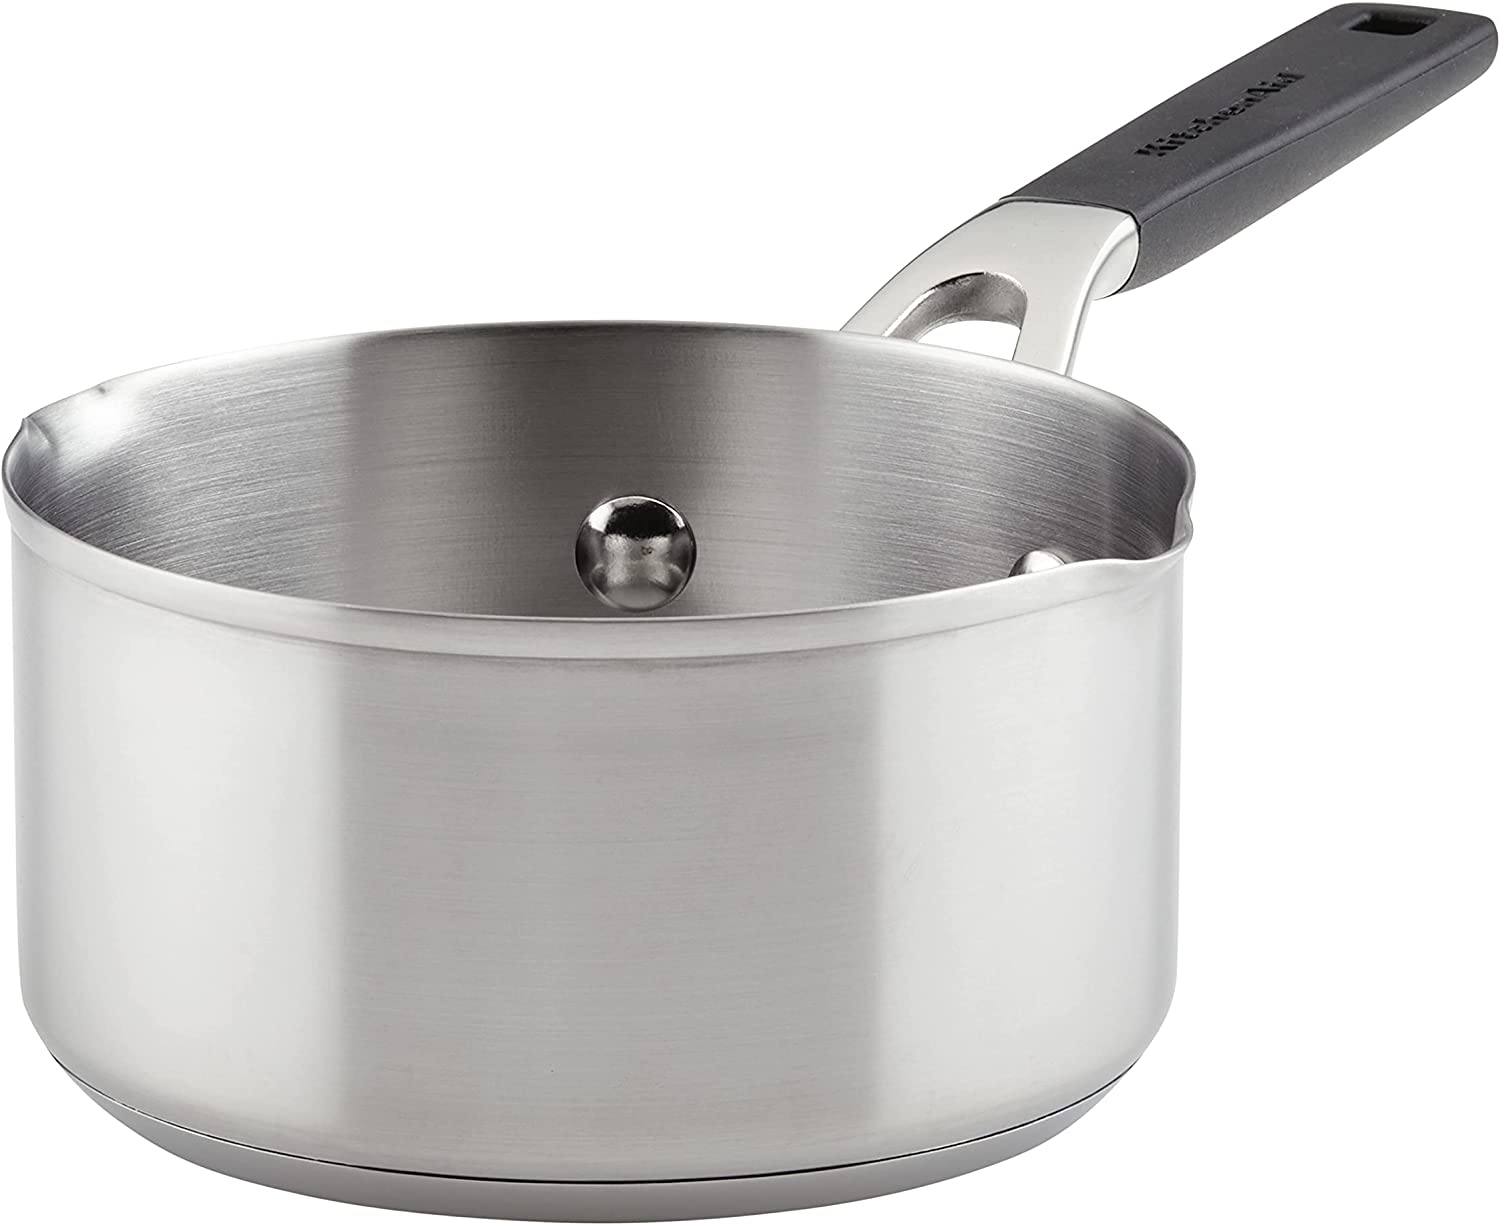 KitchenAid Stainless Steel Cooking Pot with Spout 1 Quarter Brushed Stainless Steel